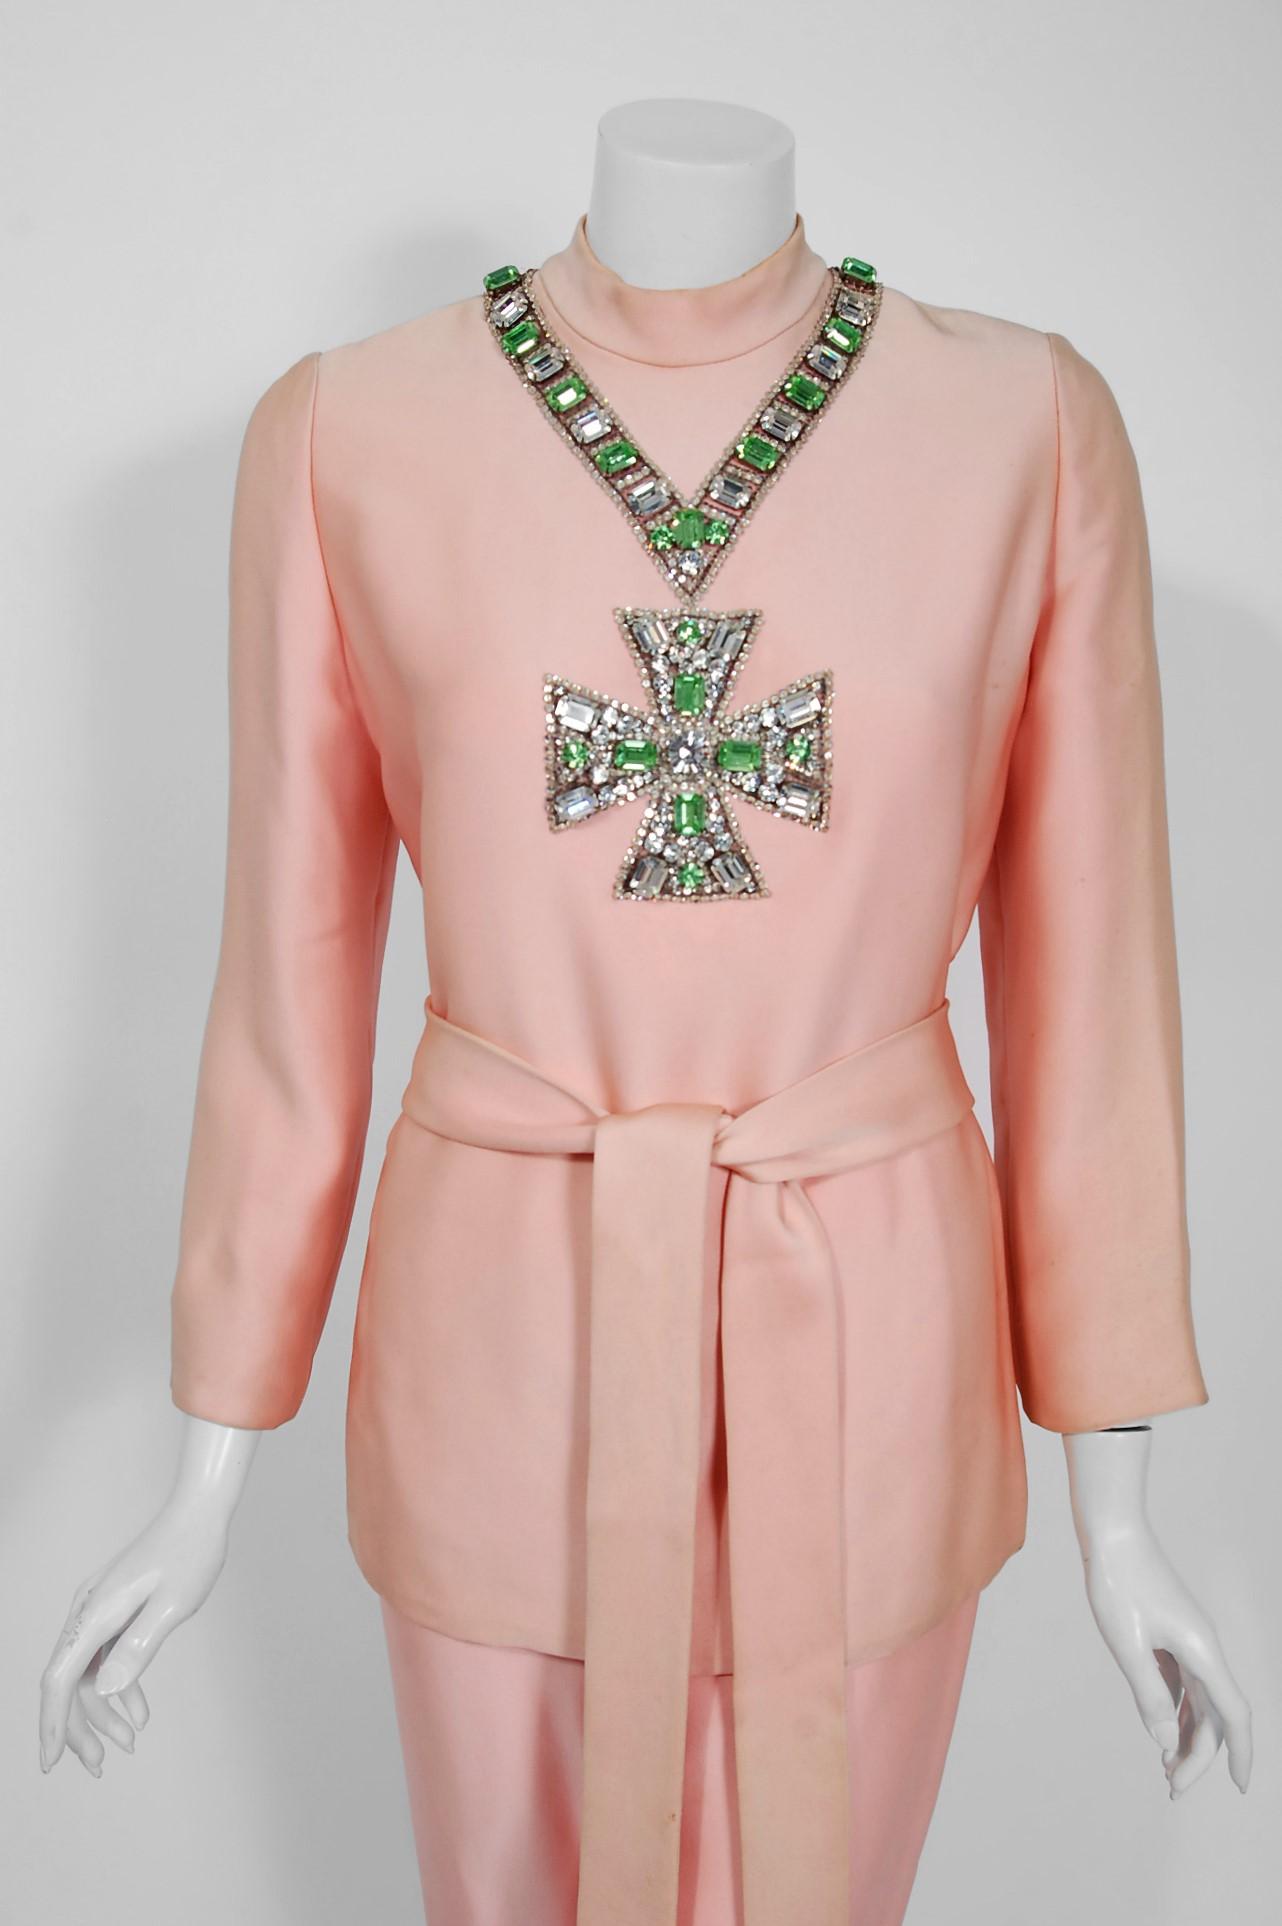 A breathtaking Norman Norell Couture pink silk three-piece pantsuit dating back to his iconic 1968 collection. As pictured, the identical ensemble was recently exhibited and also held in the premantly collection at The Metropolitan Museum of Art in